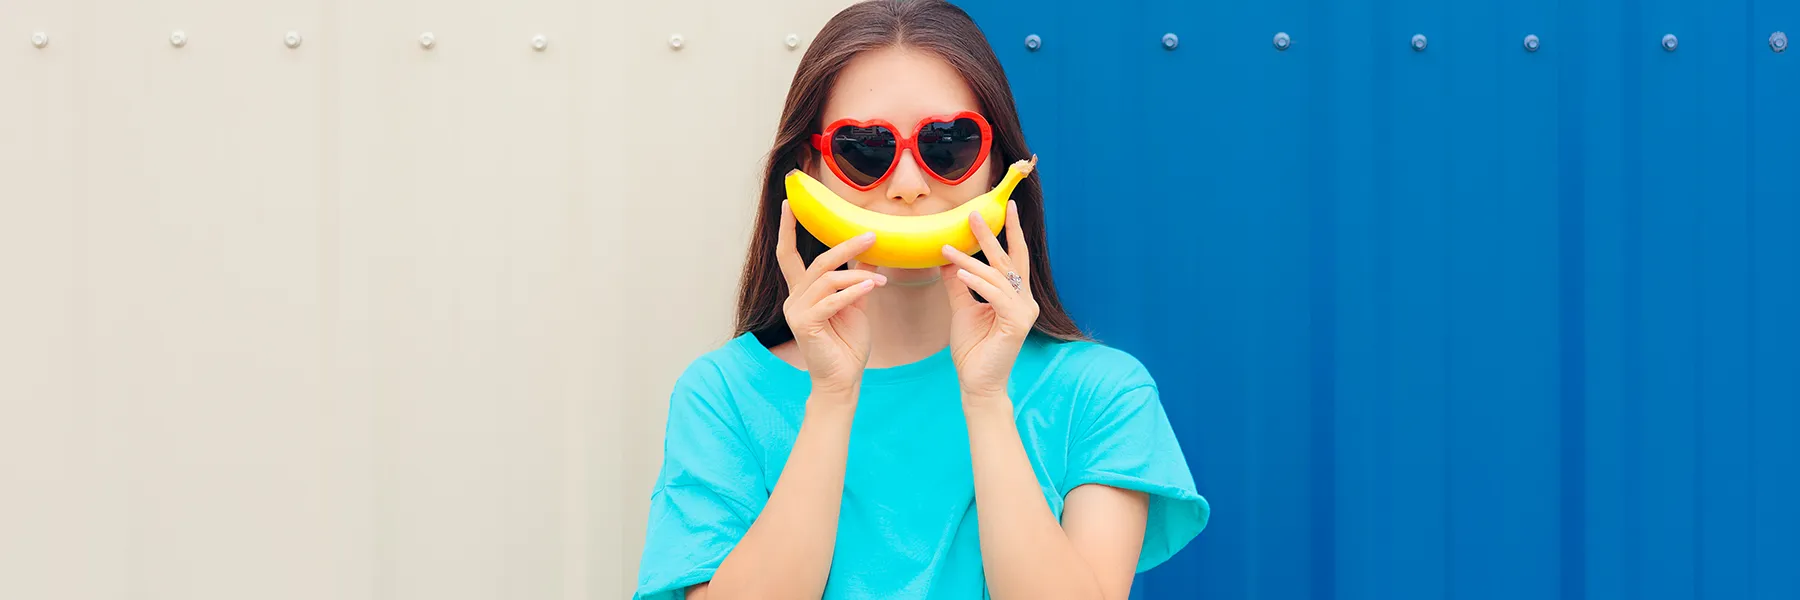 Girl holding a banana rich in potassium